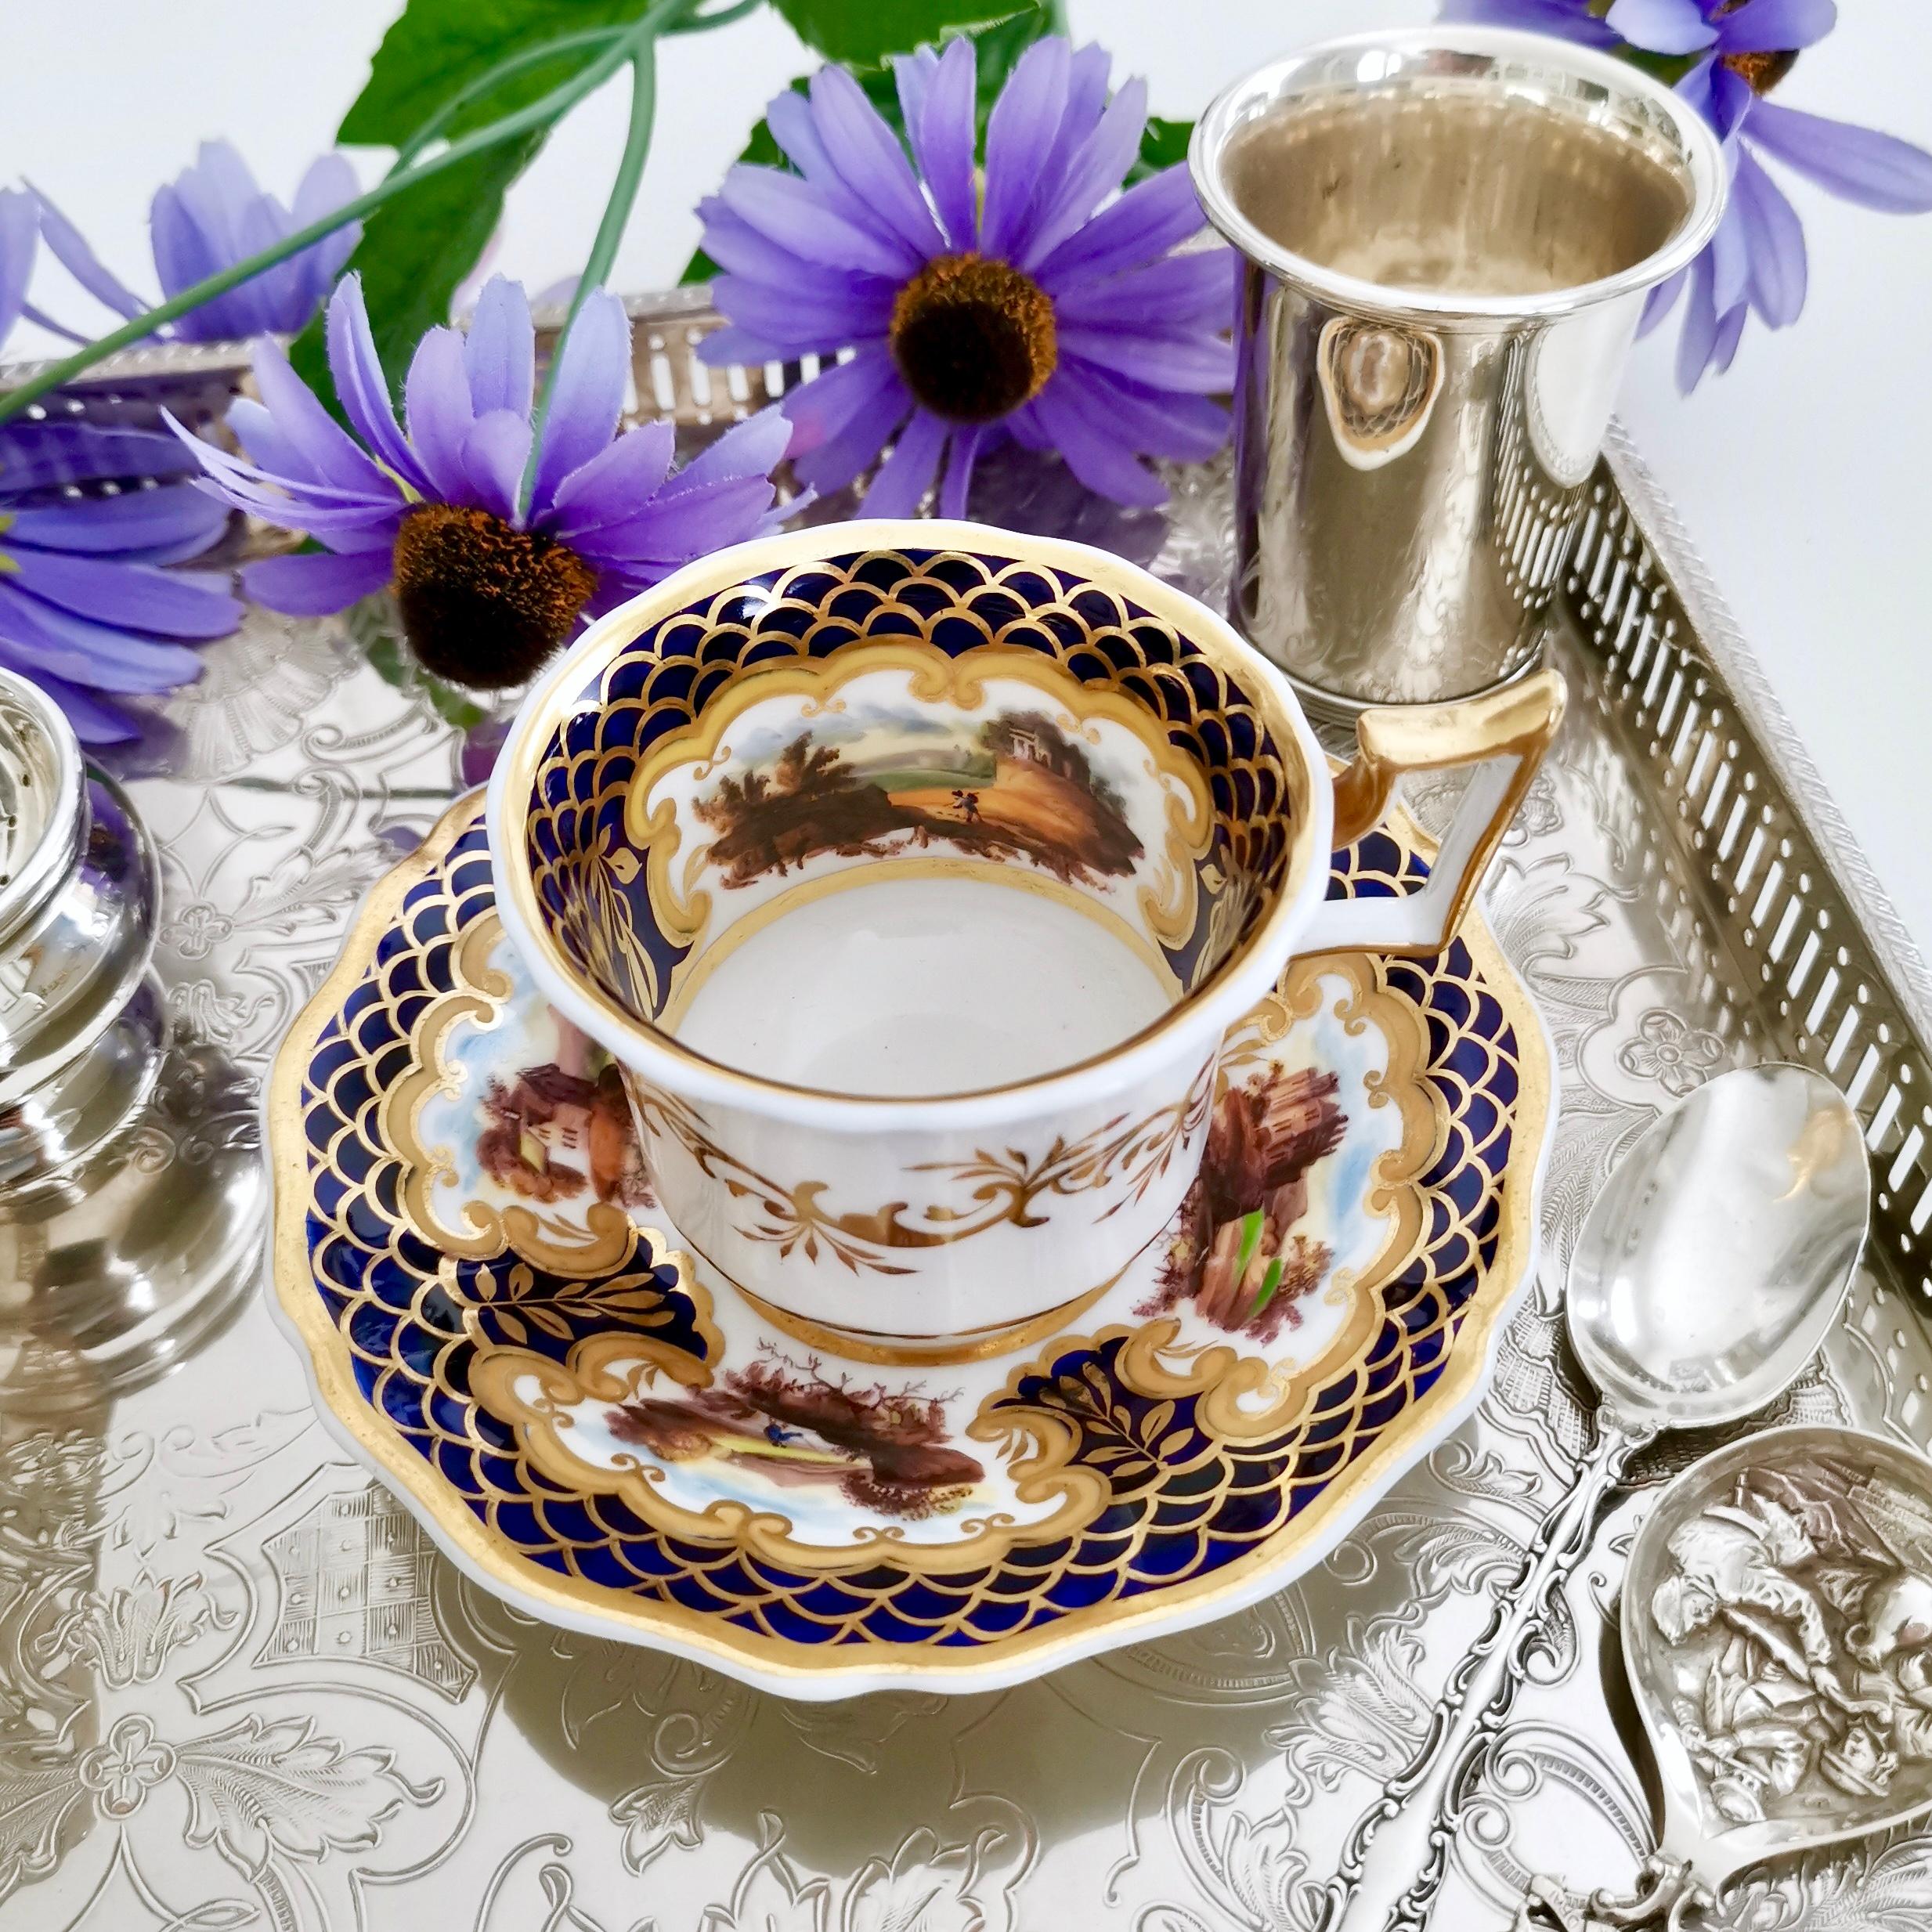 This is a rare Ridgway cup and saucer made circa 1825, which is known as the Regency period. The shape of the cup is typical for its time and is called the 